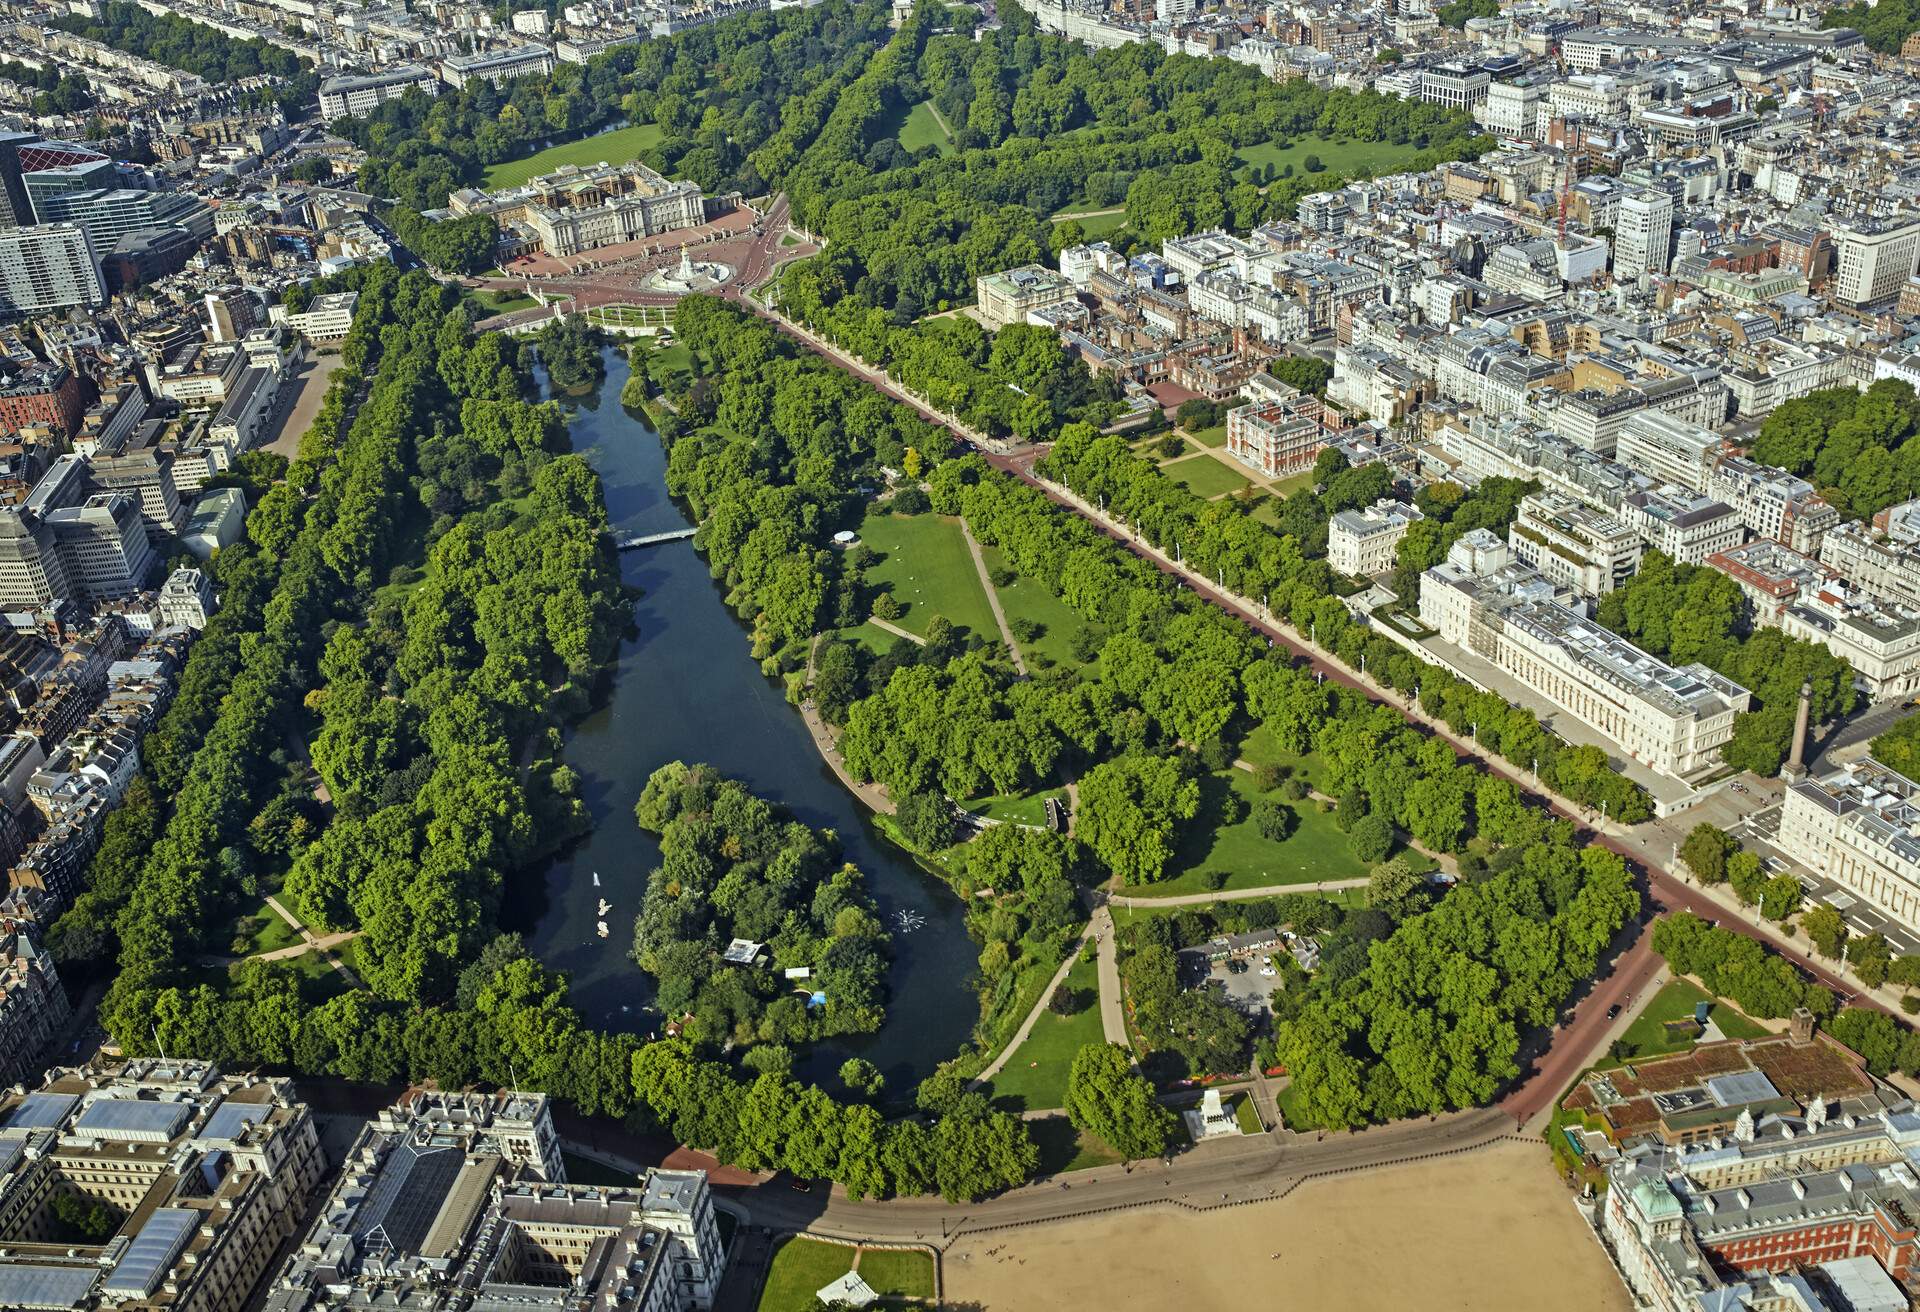 Aerial view of Buckingham Palace and St James Park in London